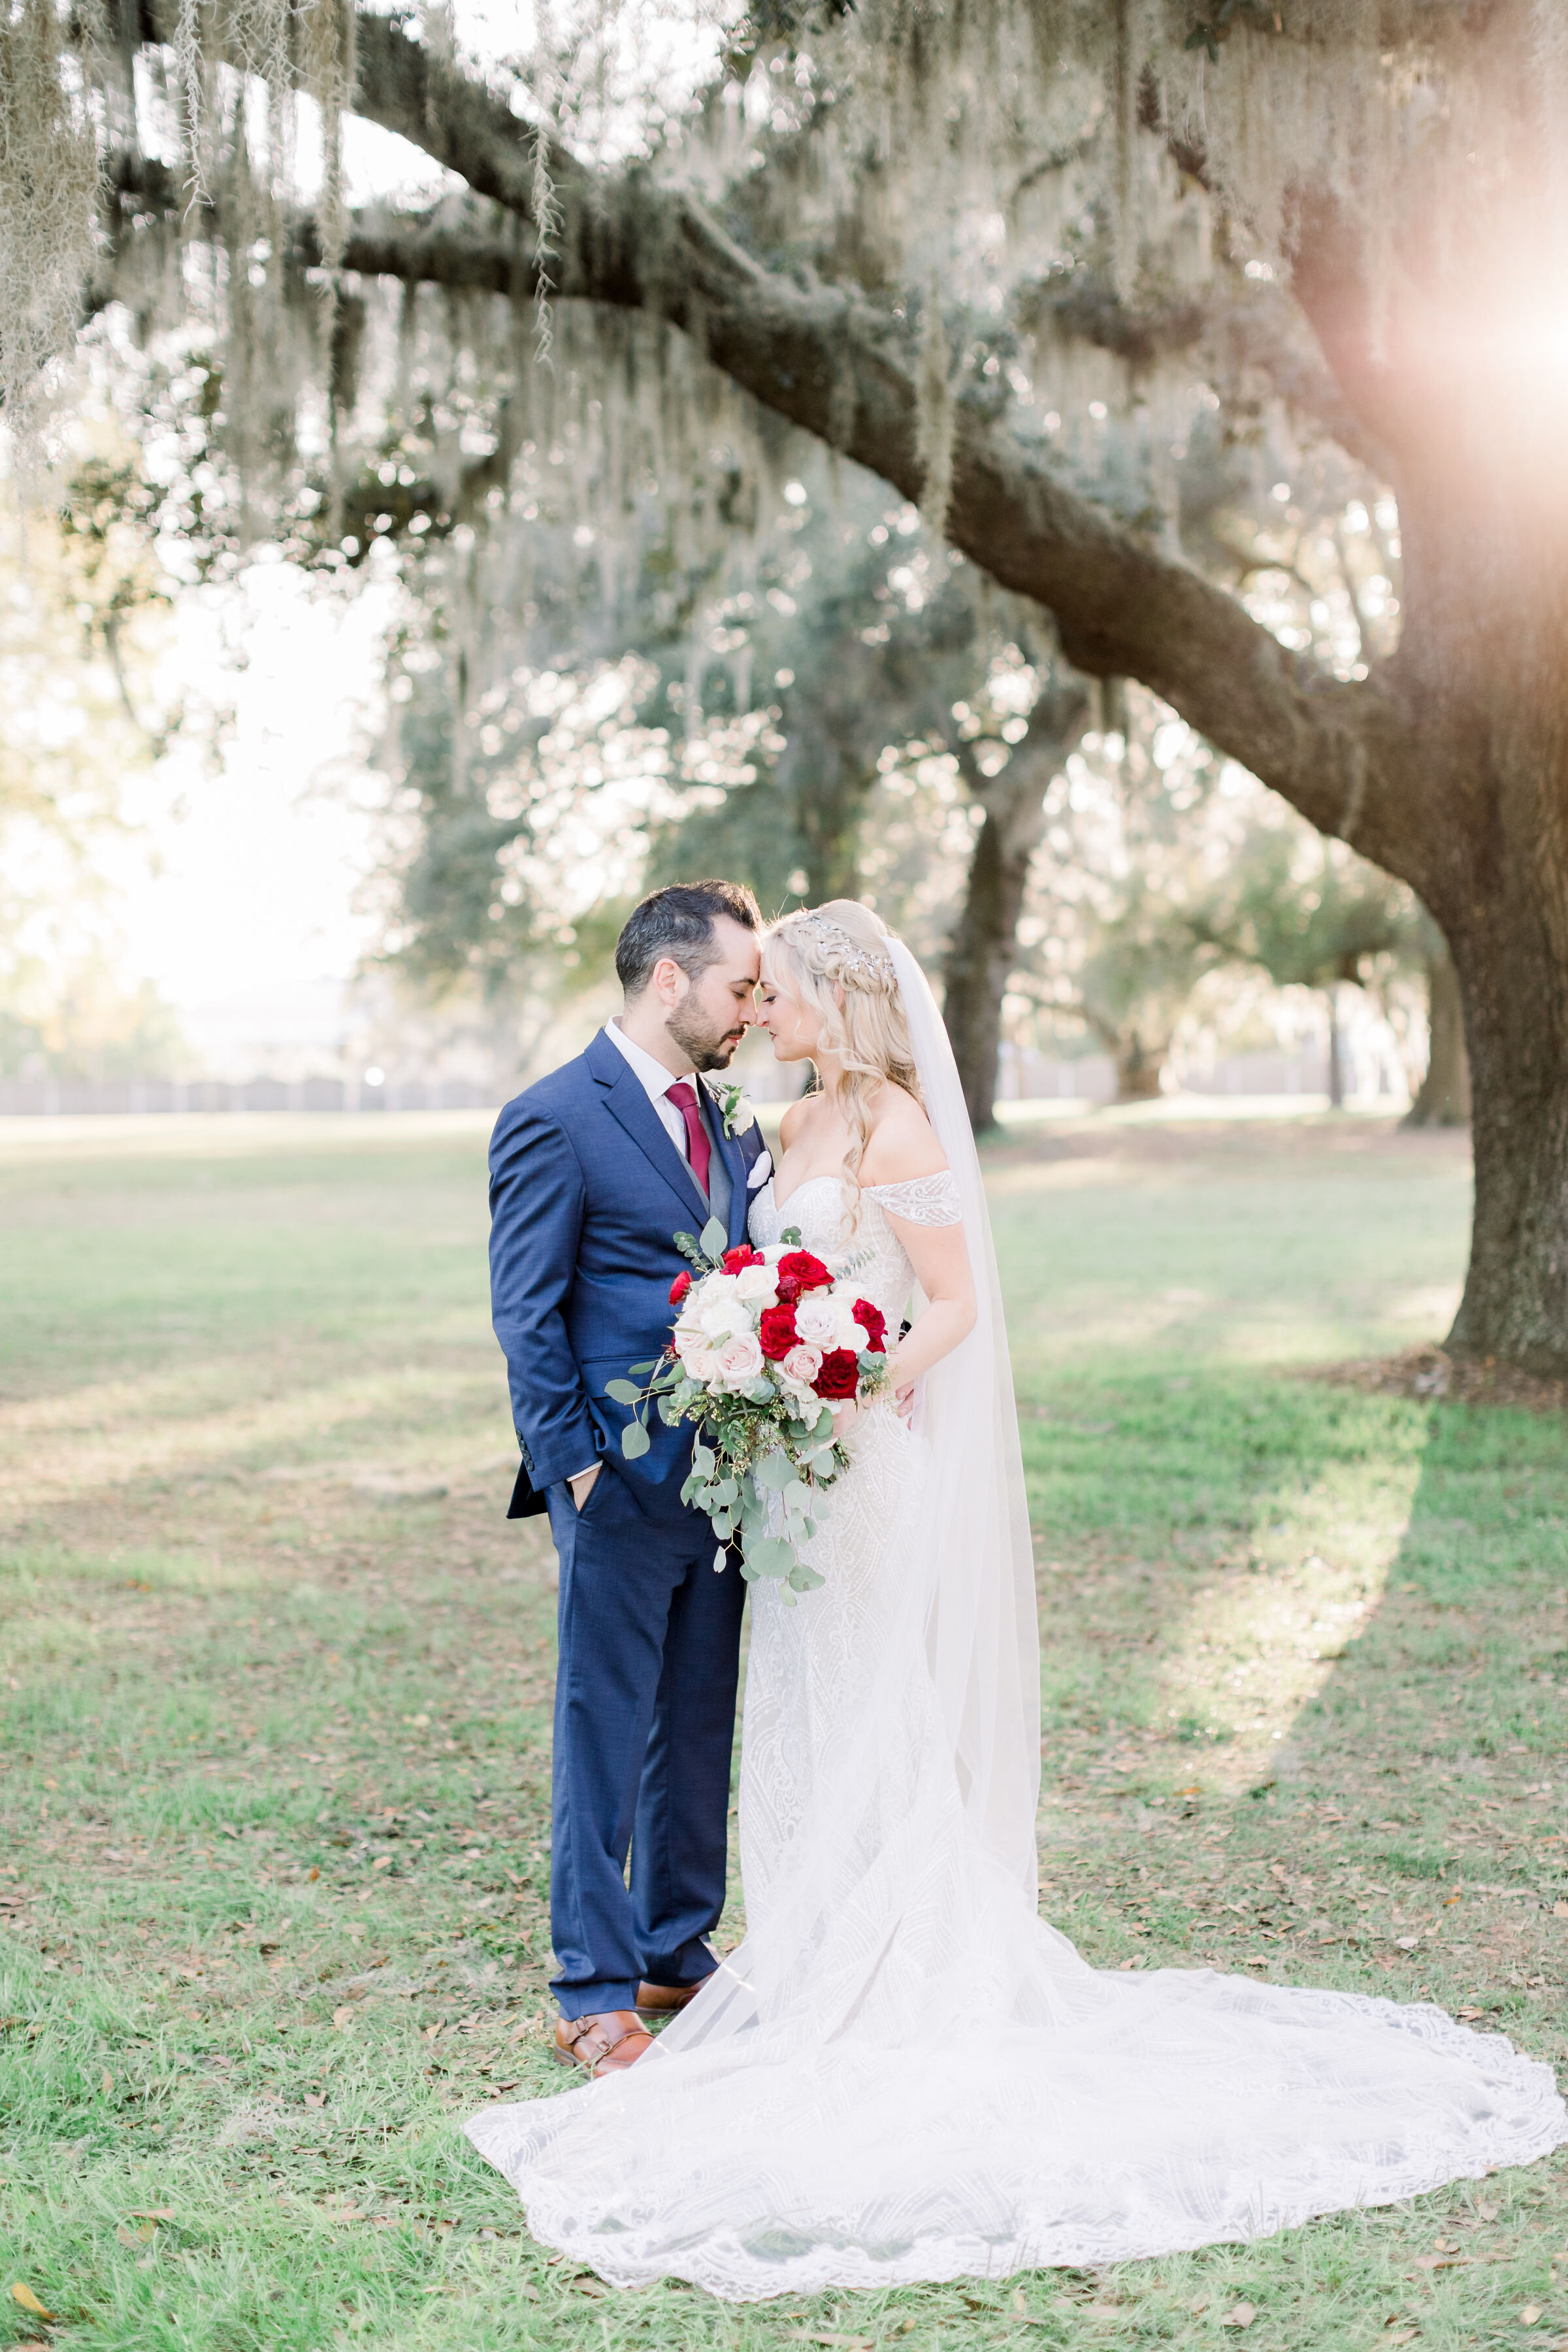 A beautiful country style winter wedding with an outdoor ceremony in Florida.jpg